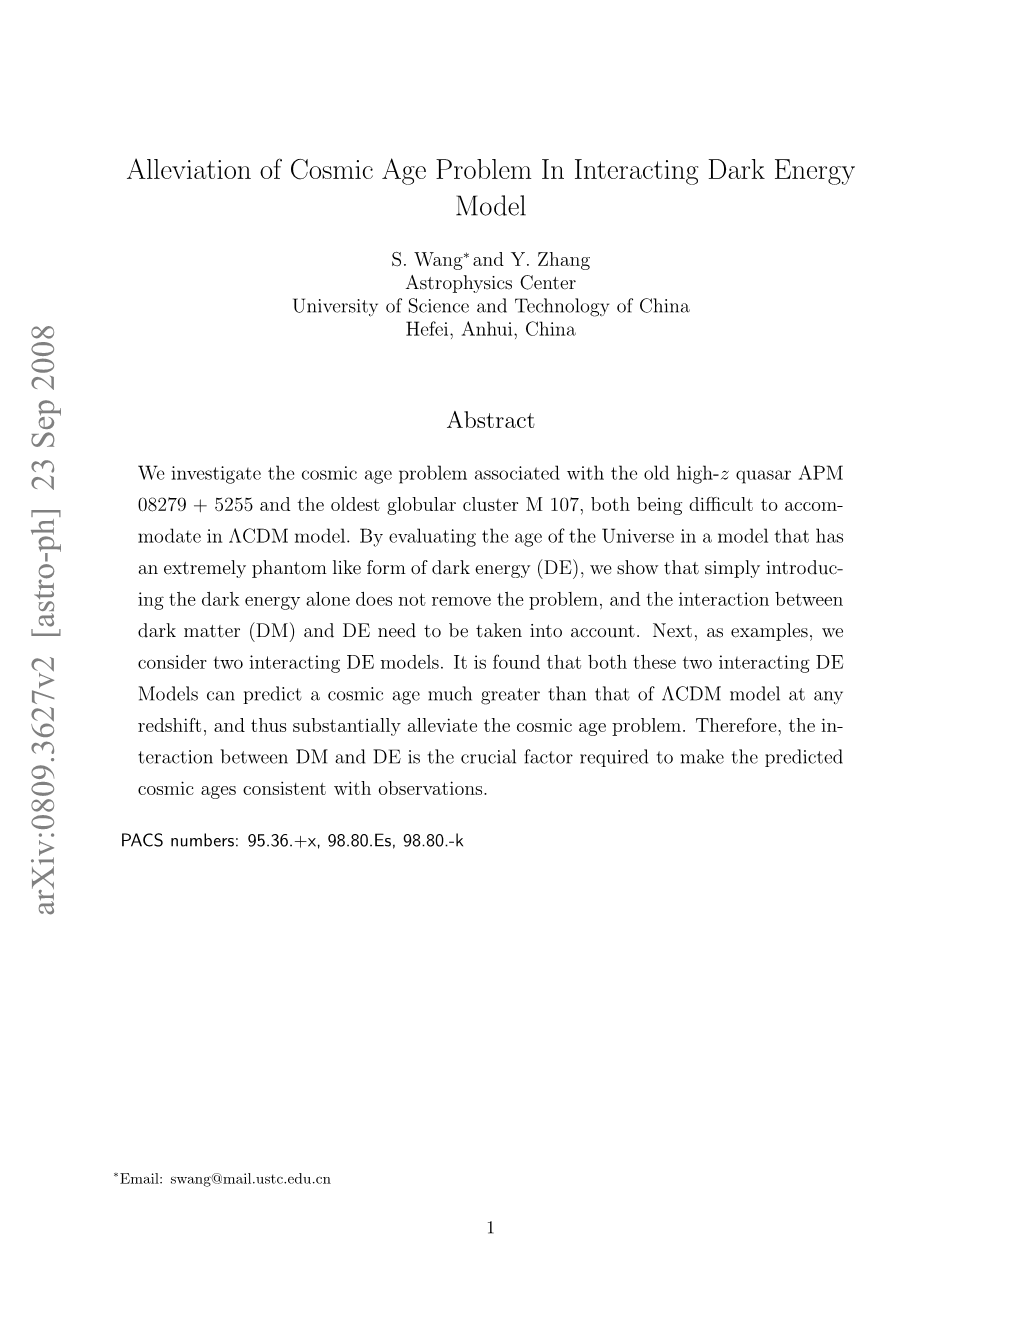 Alleviation of Cosmic Age Problem in Interacting Dark Energy Model